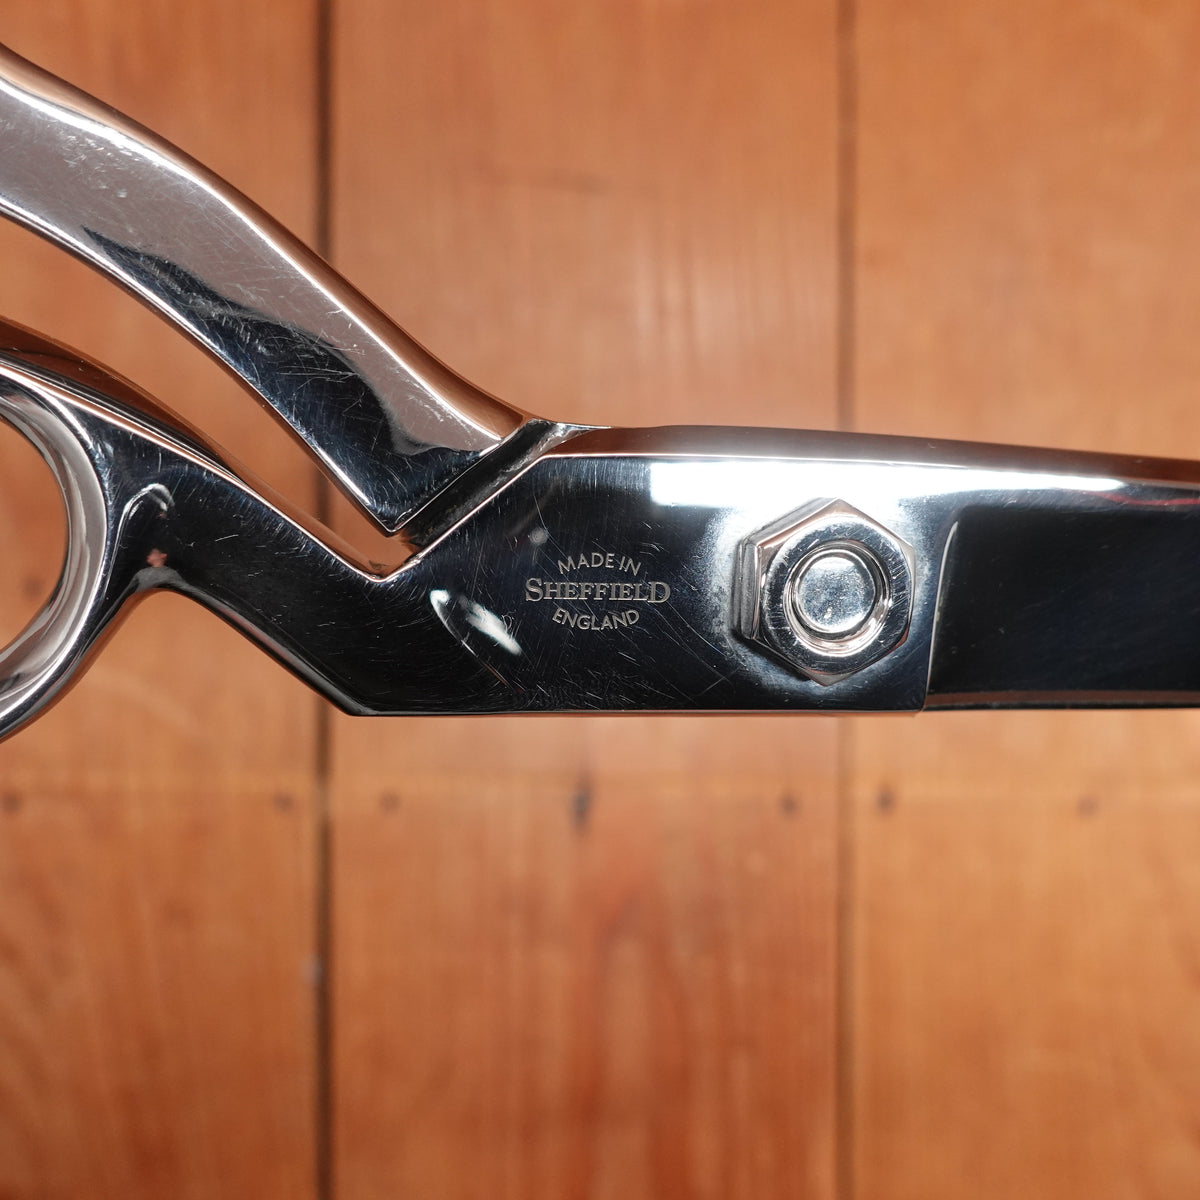 Ernest Wright 10" Tailor Shears - Carbon Steel